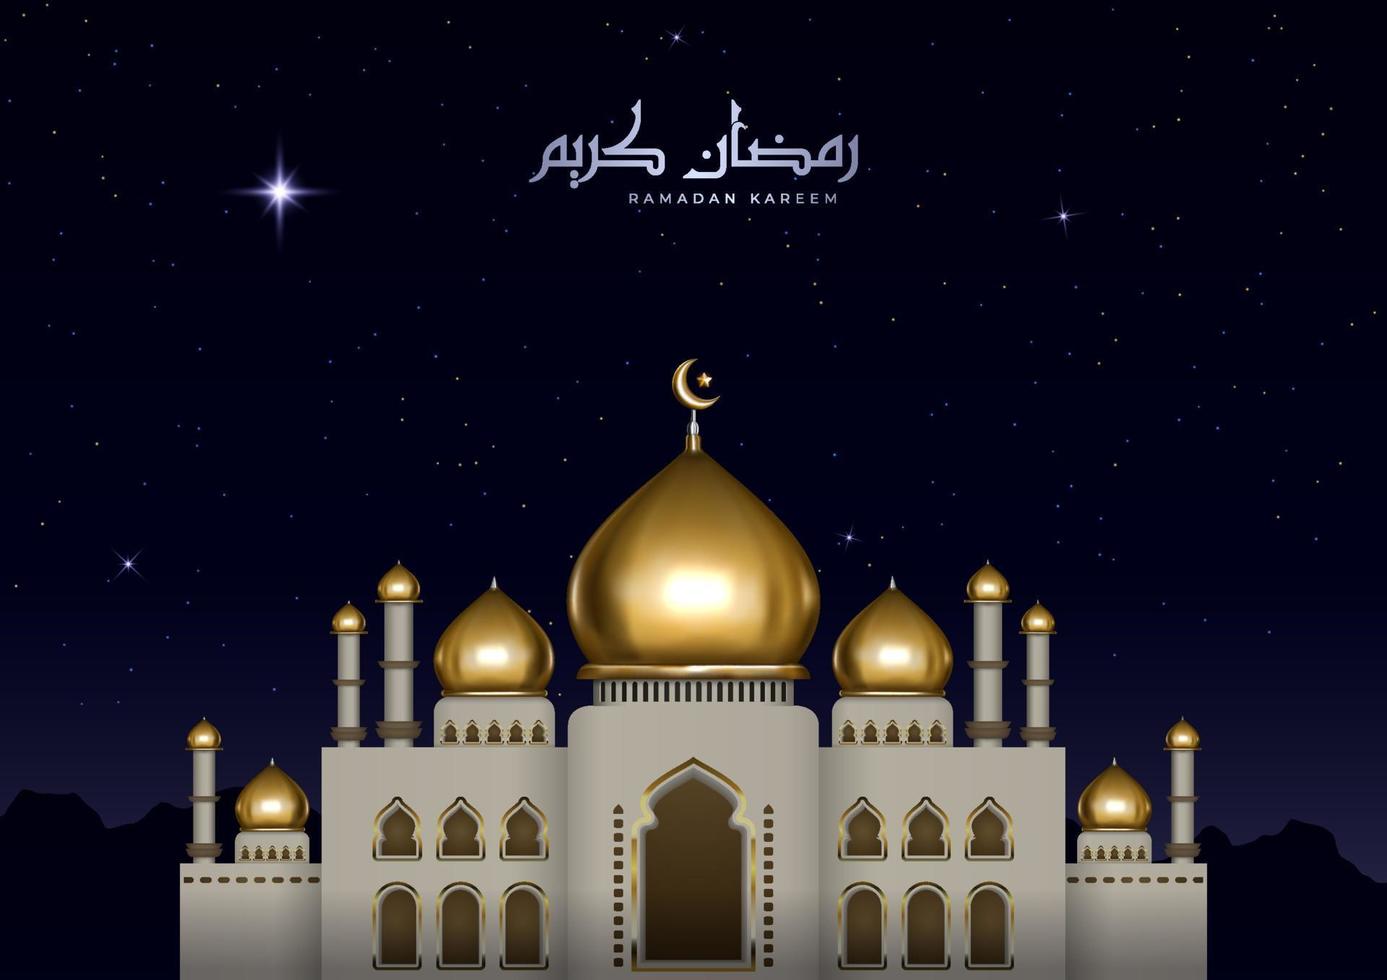 Beautiful Islamic illustration with Arabic calligraphy and gold mosque. Realistic Ramadan Kareem greeting card with night view vector